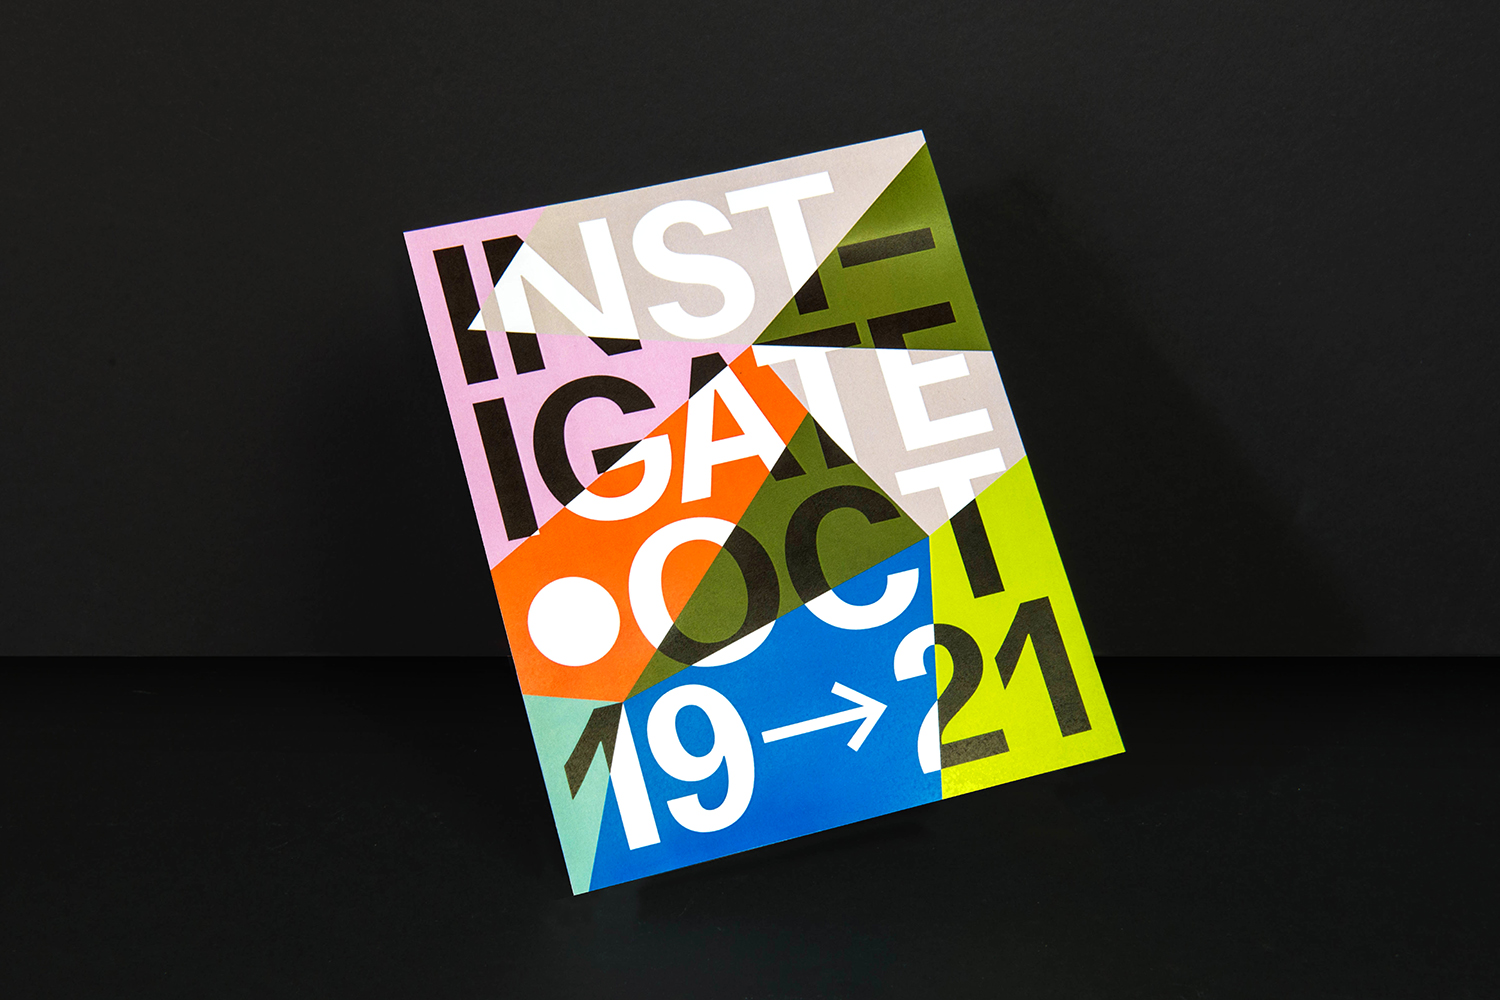 Graphic identity and posters designed by Collins for annual conference PopTech